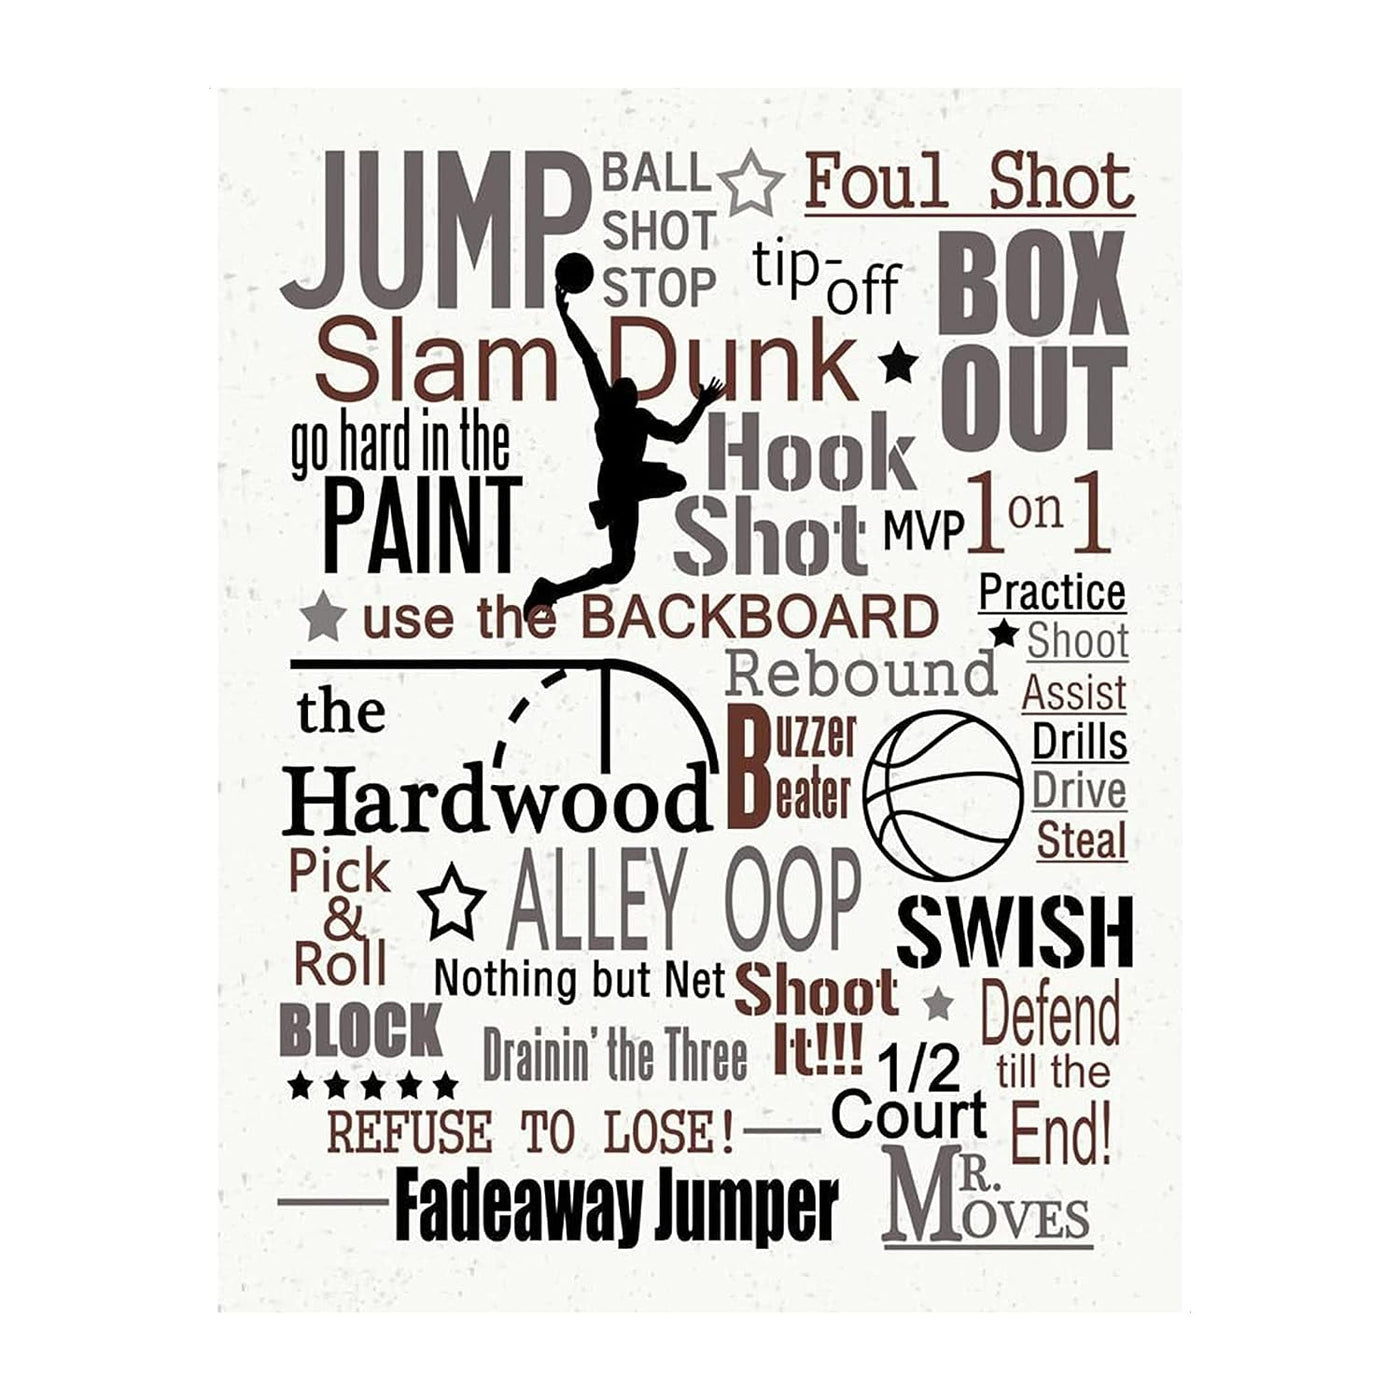 Basketball"Smack Talk" Word Art- 8 x 10"-Sports Poster Print- Ready To Frame. Motivational Wall Art with Key"Winning Words". Sports Home Decor-Bedroom Decor. Great for Locker Room-Gym-Dorm-Man Cave.